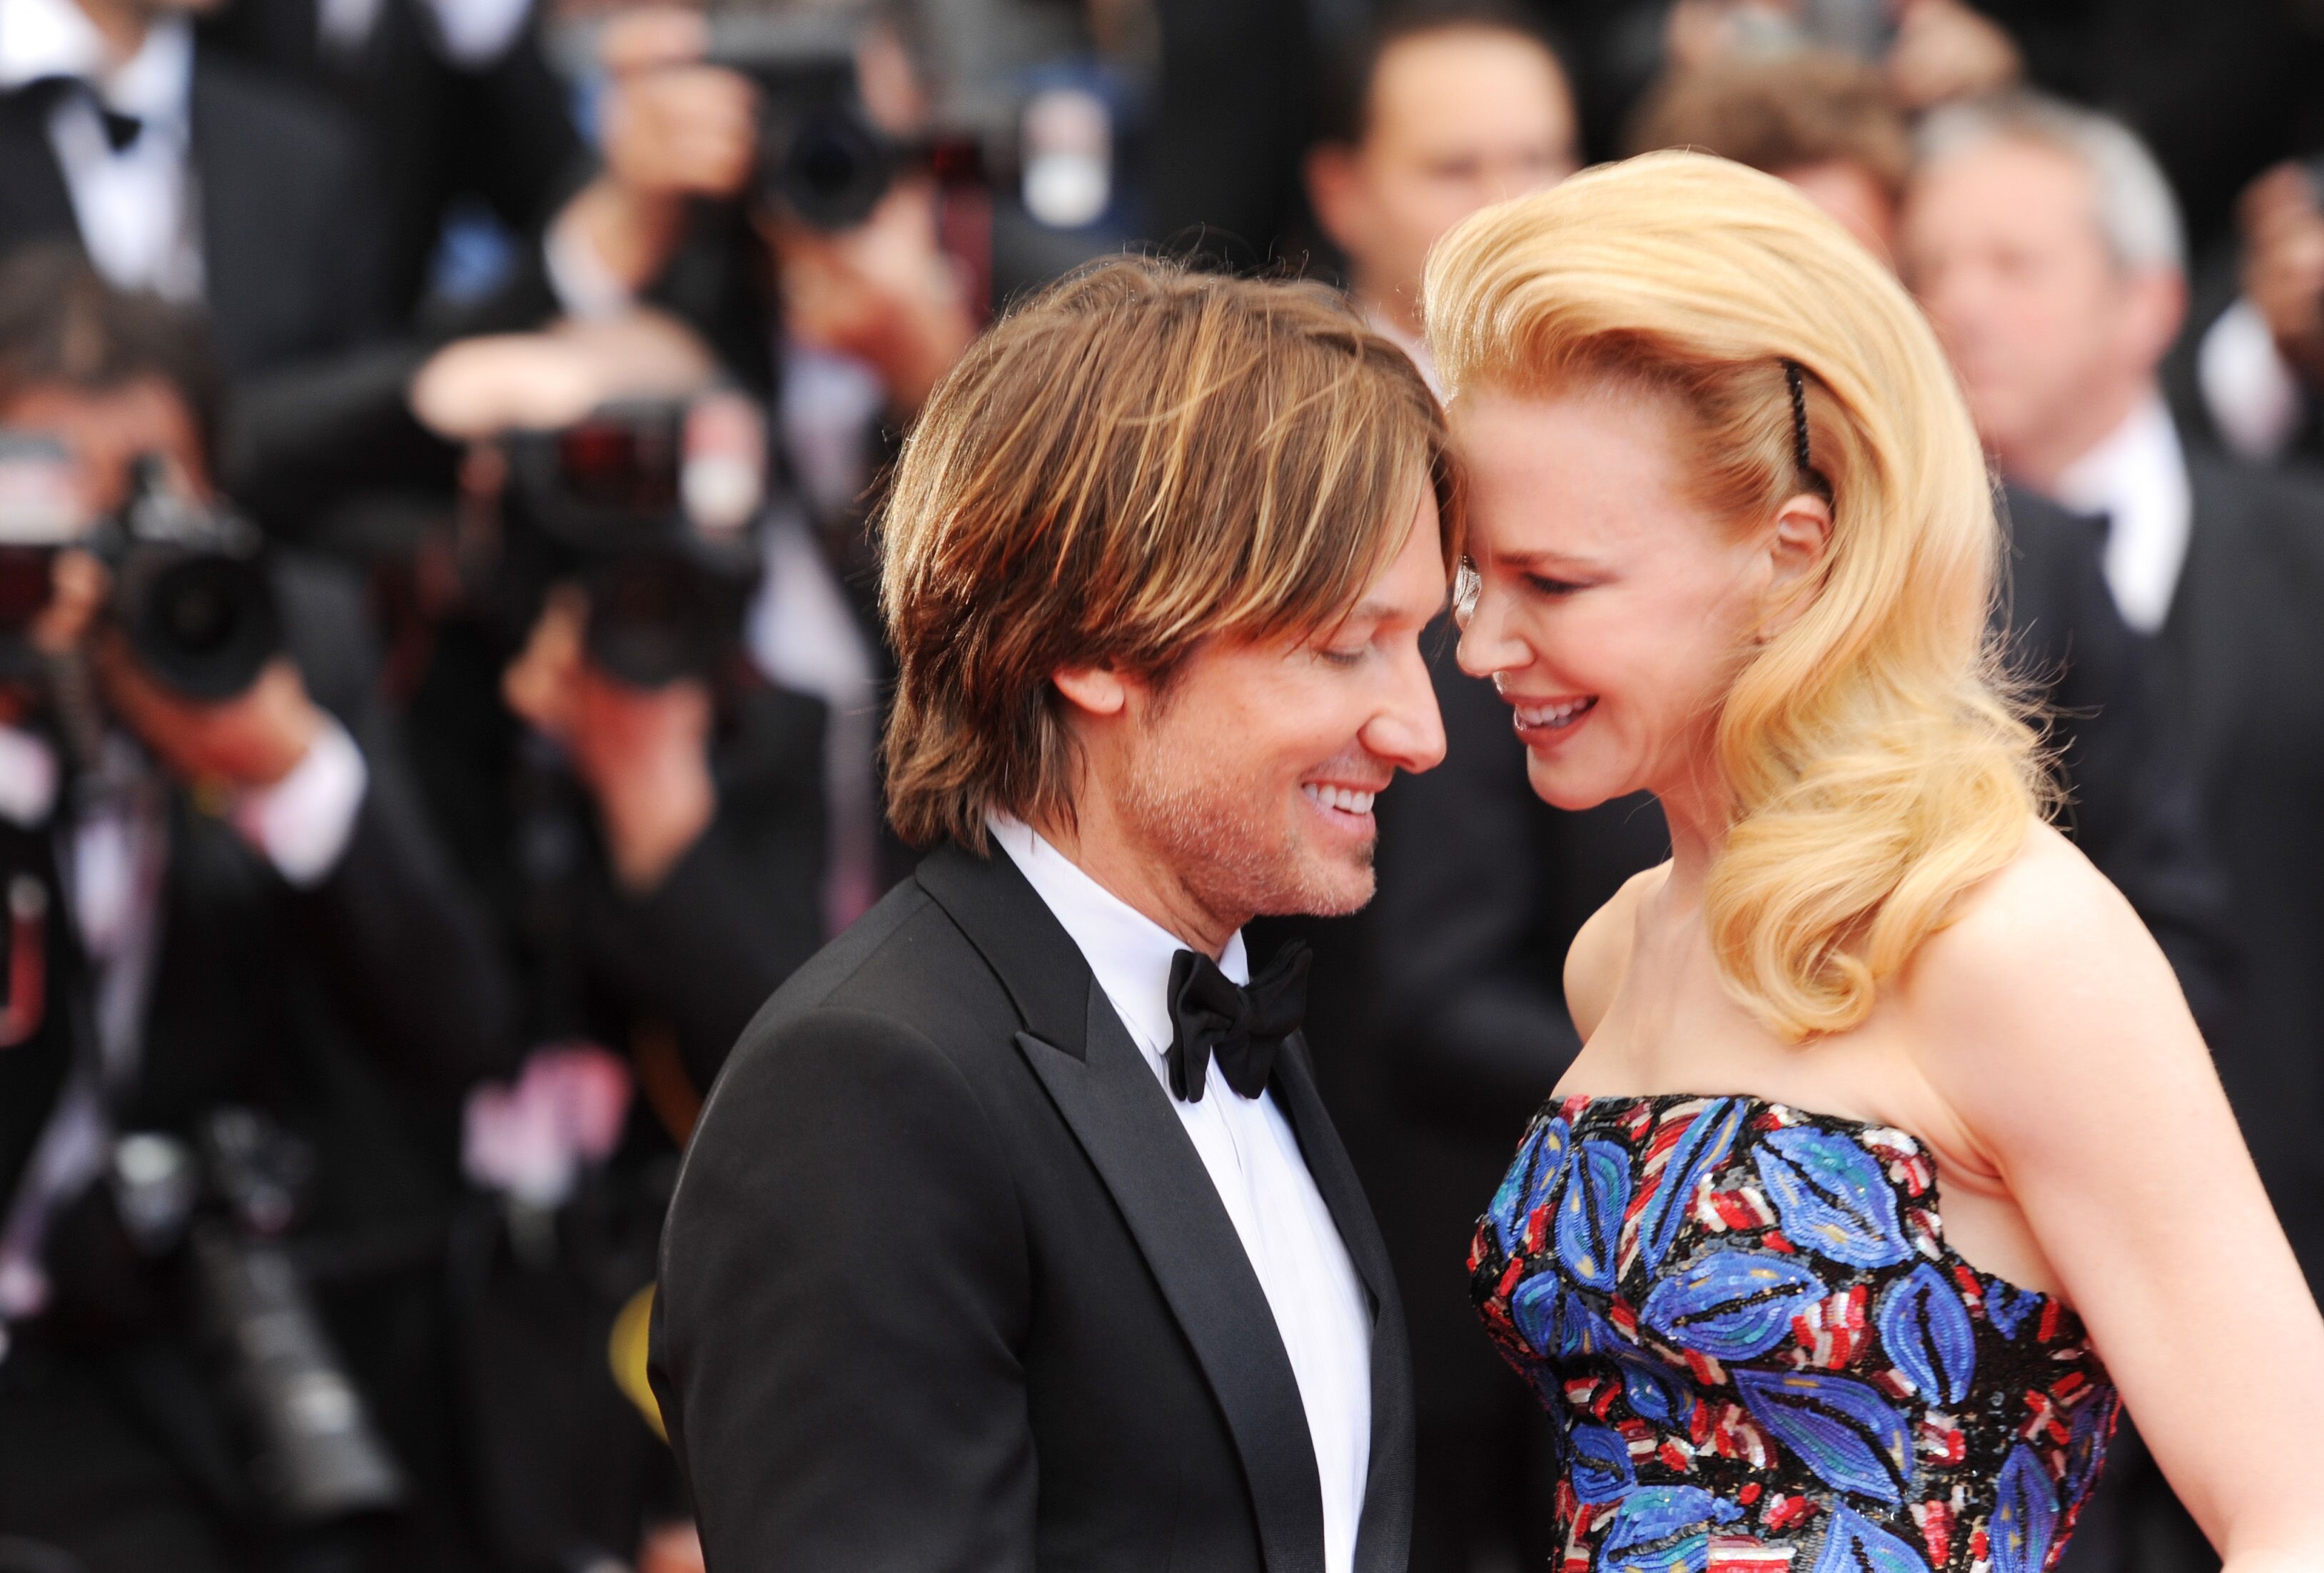 Keith Urban and Nicole Kidman attend the "Inside Llewyn Davis" premiere. | Source: Getty Images